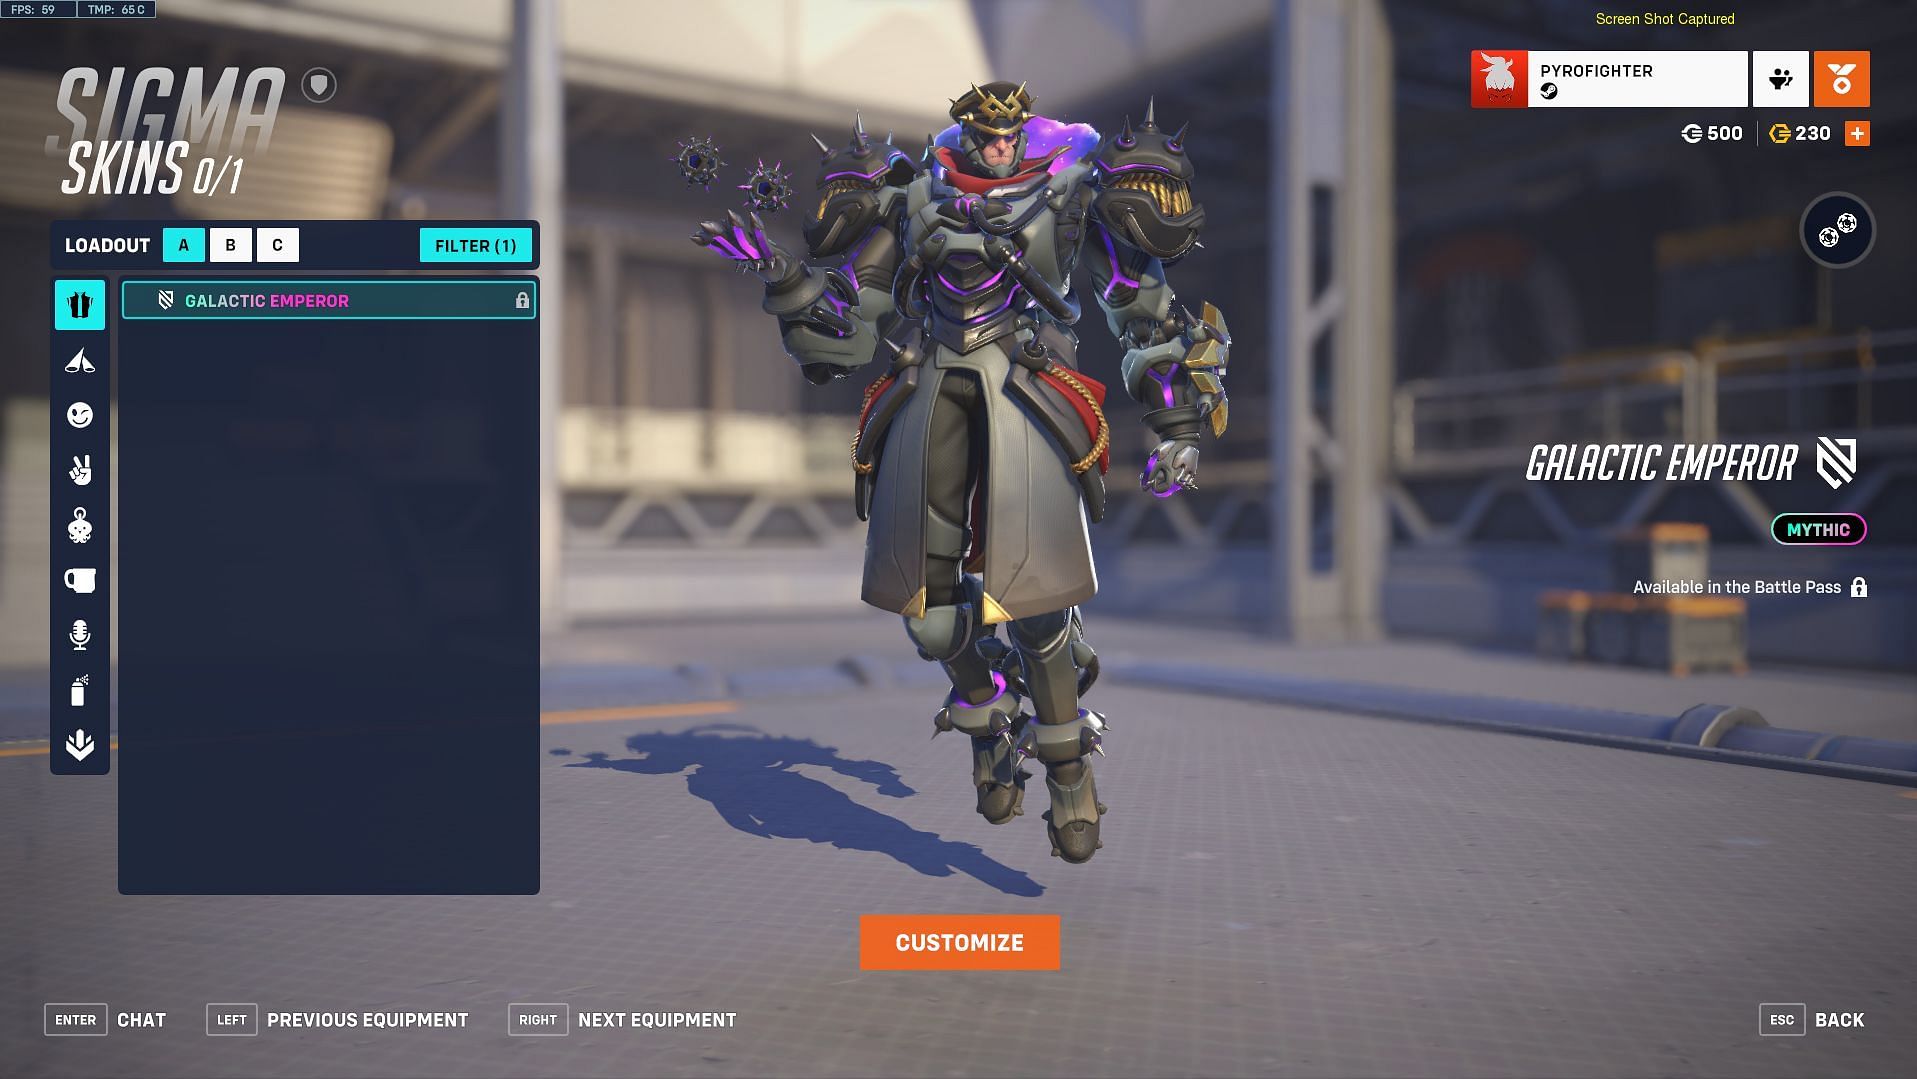 Galactic Emperor is the best Sigma skin (Image via Blizzard Entertainment)